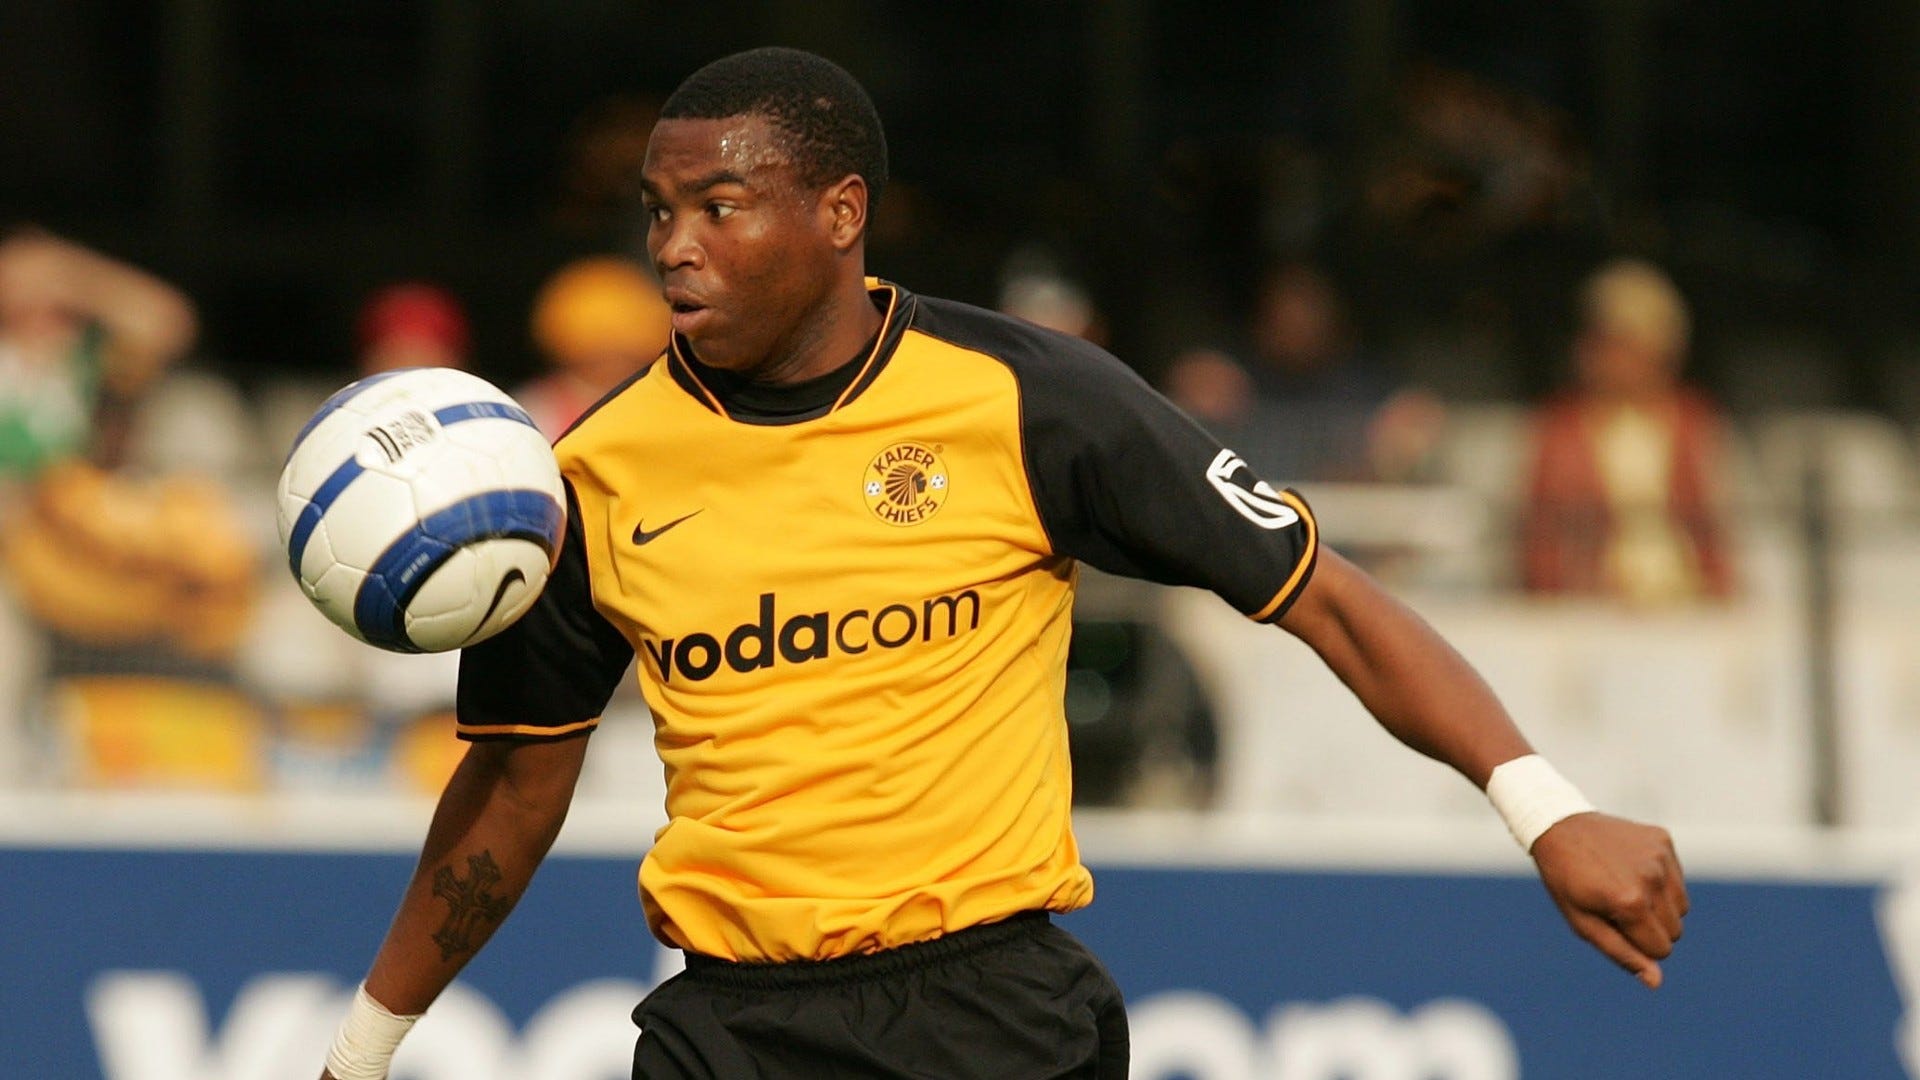 It will be difficult for Kaizer Chiefs to win PSL title without Maluleka